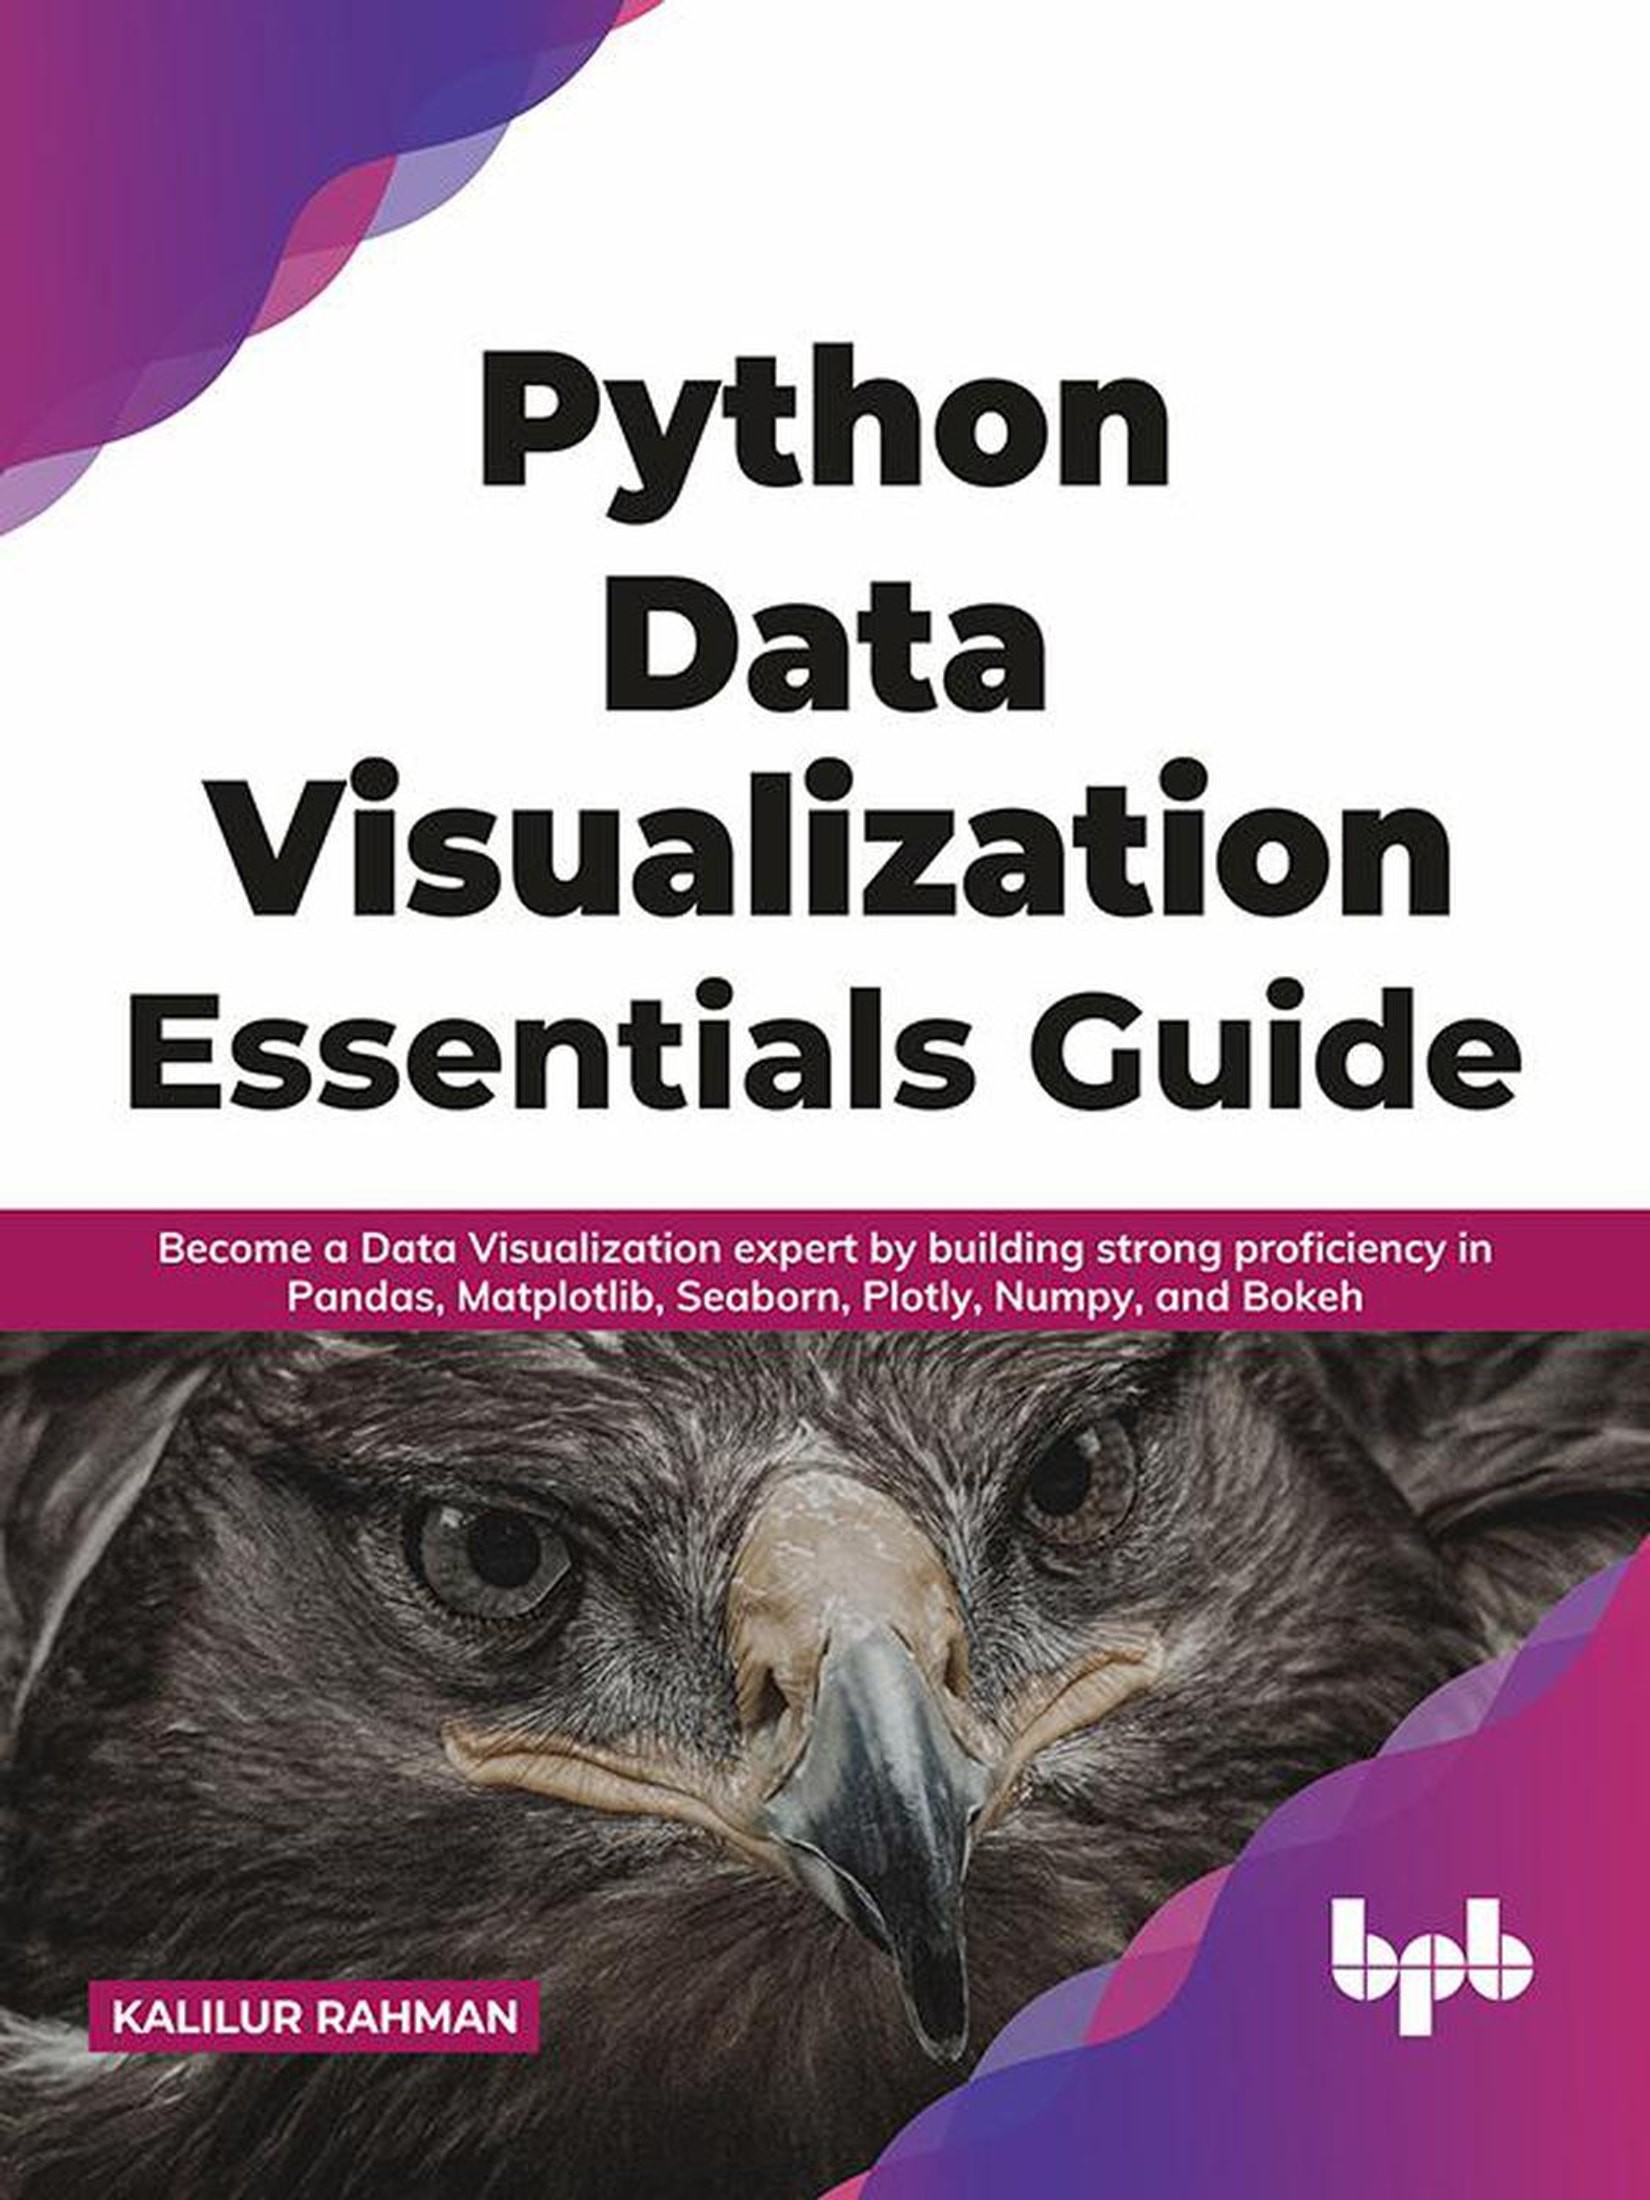 Python Data Visualization Essential Guide: A Quick Guide to Get Yourself Secured and Protected... From Digital Threats, Social Media Risks, and Cybe